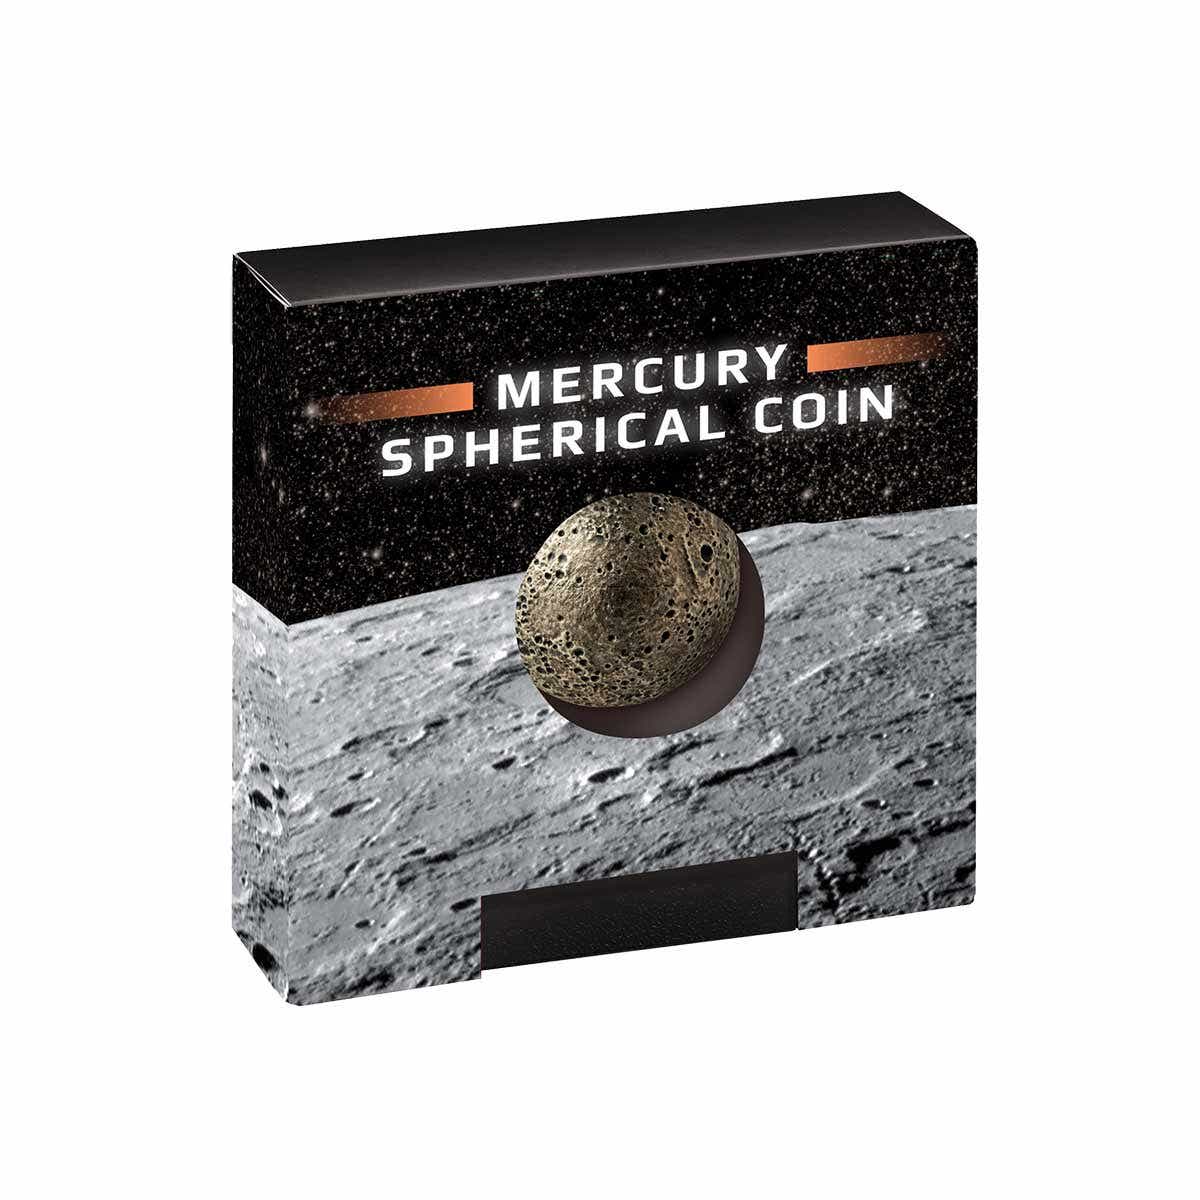 2022 $5 Mercury Sphere 1oz Silver Antiqued Coin Cased View